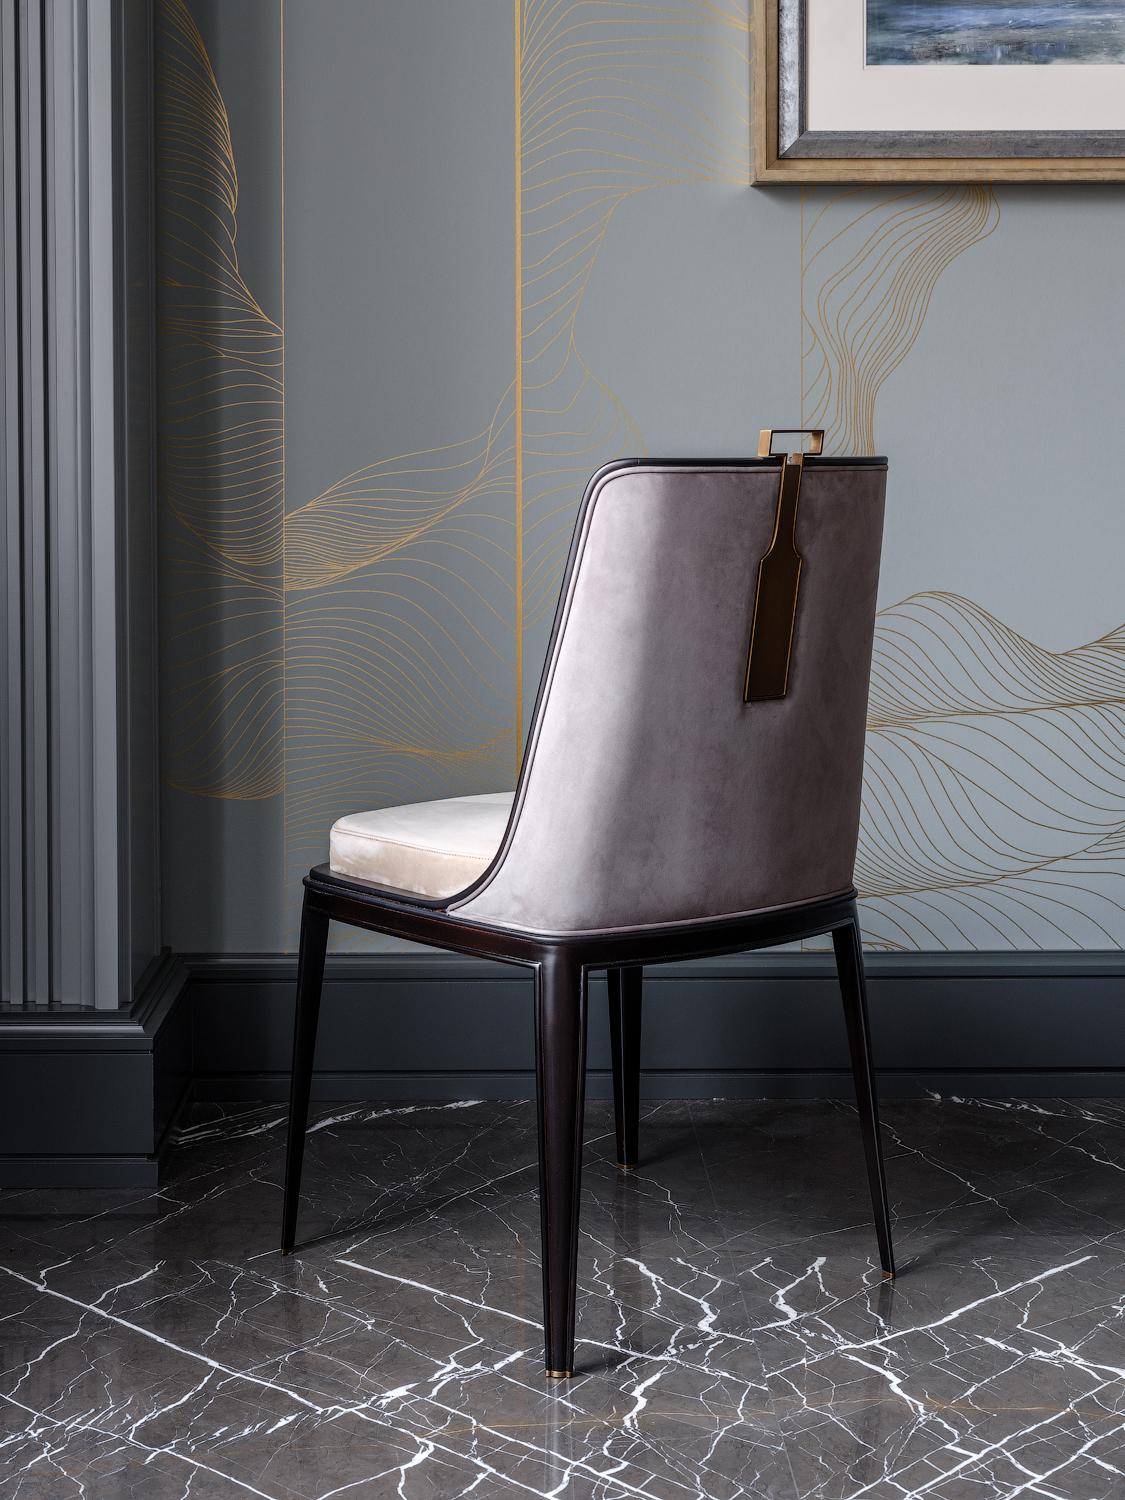 The Metallah modern dining chair has an unusual cube-shaped construction and a trapezoid back. The chair back and body are formed from shaped composite walnut hardwood, while the legs taper elegantly to the floor. 

Two options are available: with